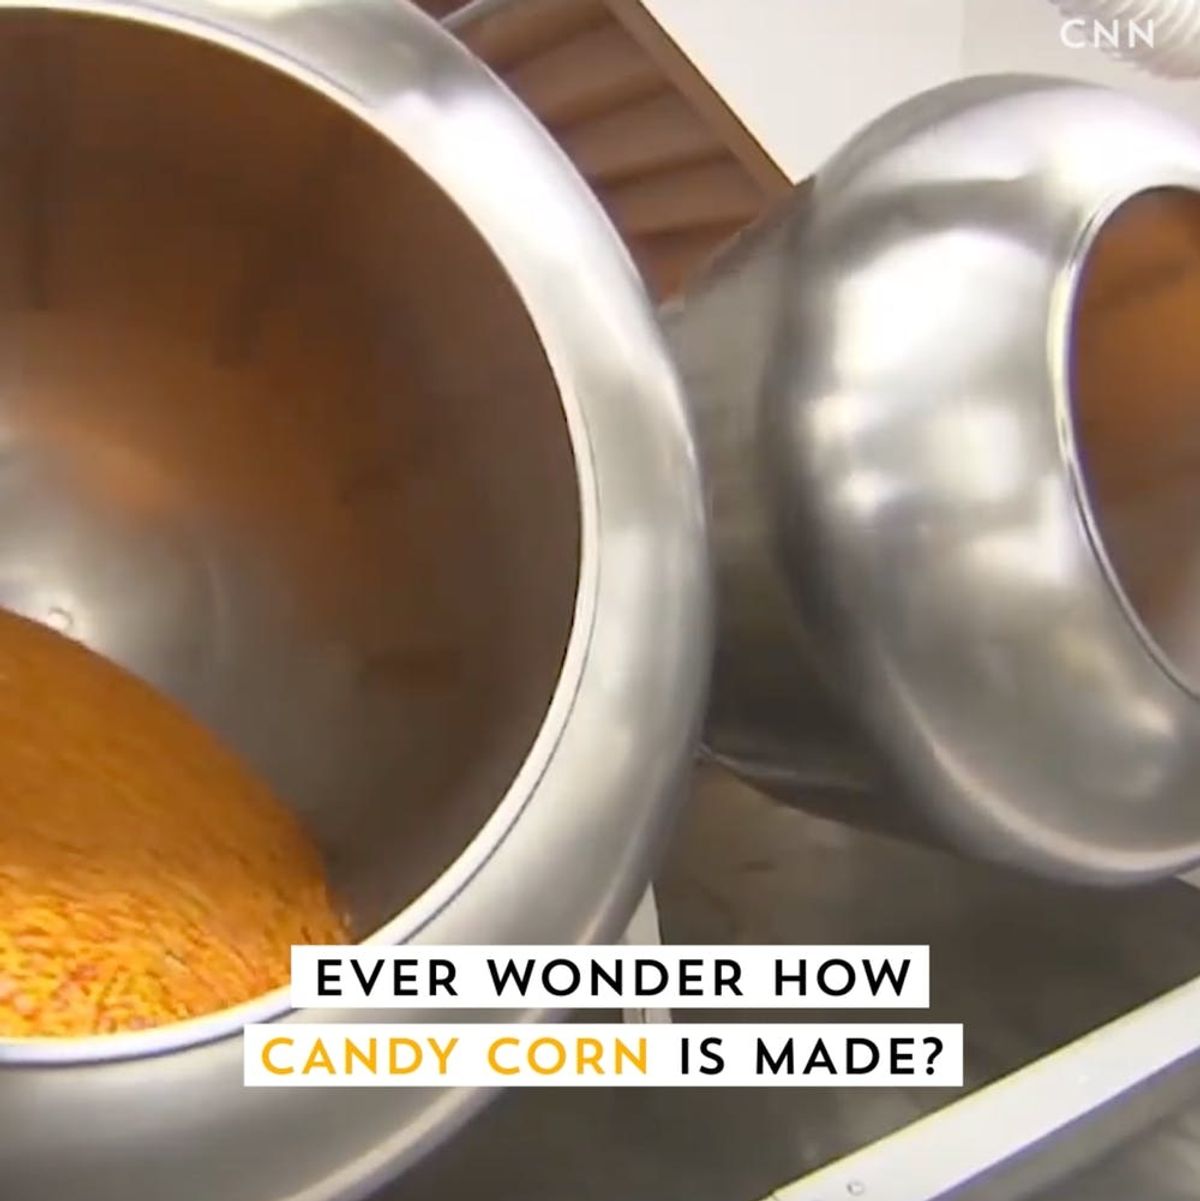 Here’s How Candy Corn Is Made